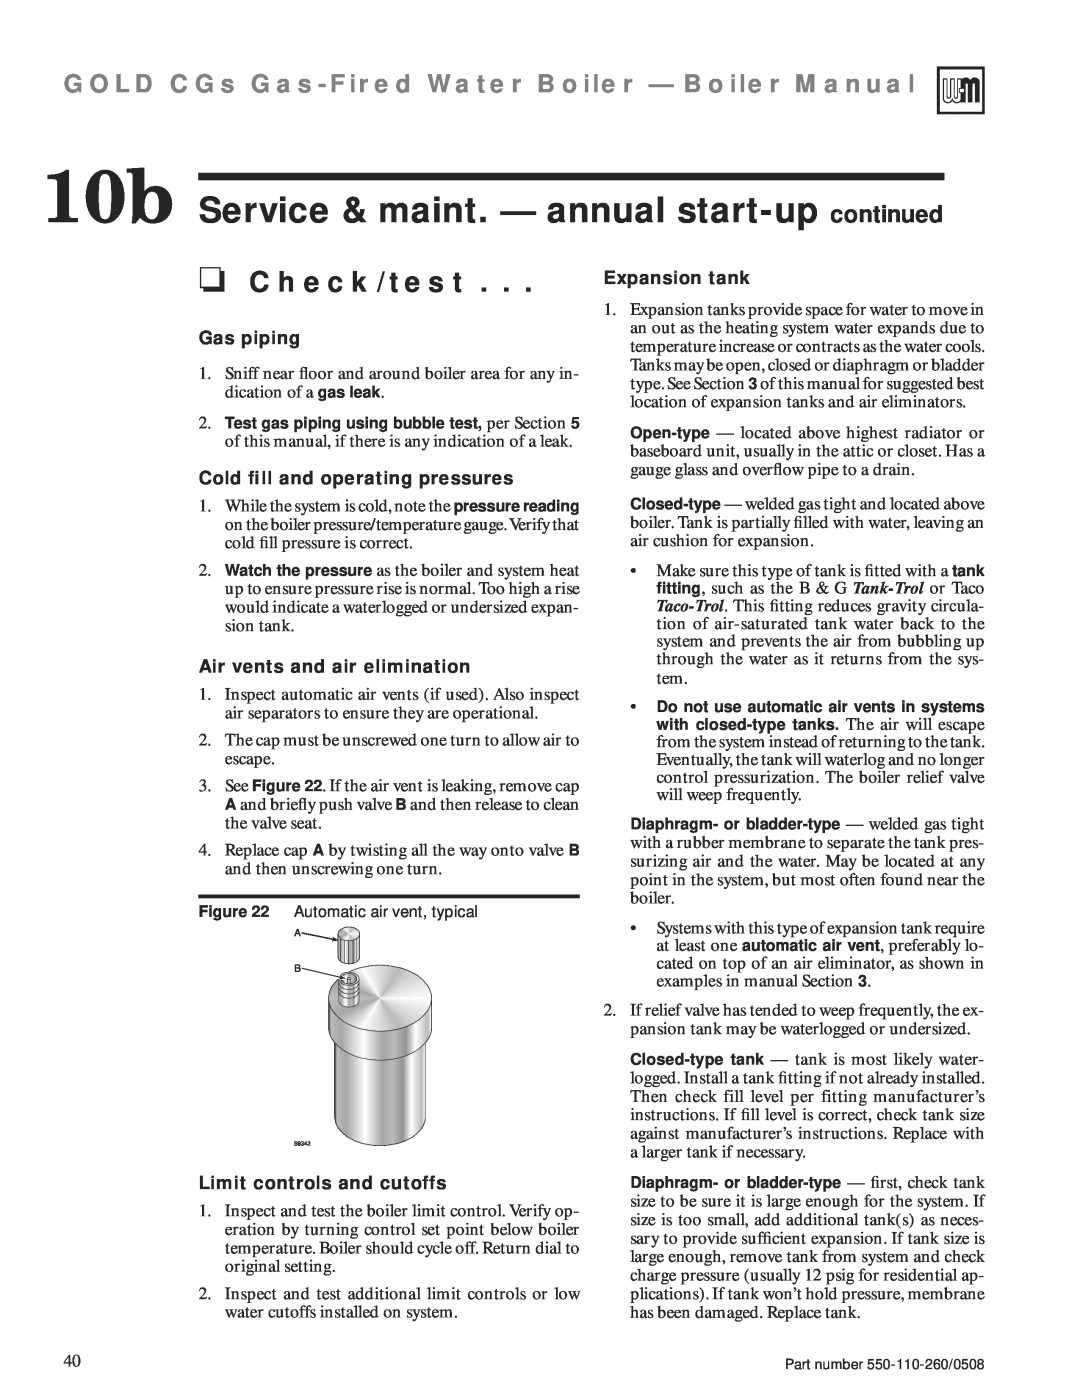 Weil-McLain 550-110-260/0508 10b Service & maint. — annual start-up continued, Check/test, Gas piping, Expansion tank 